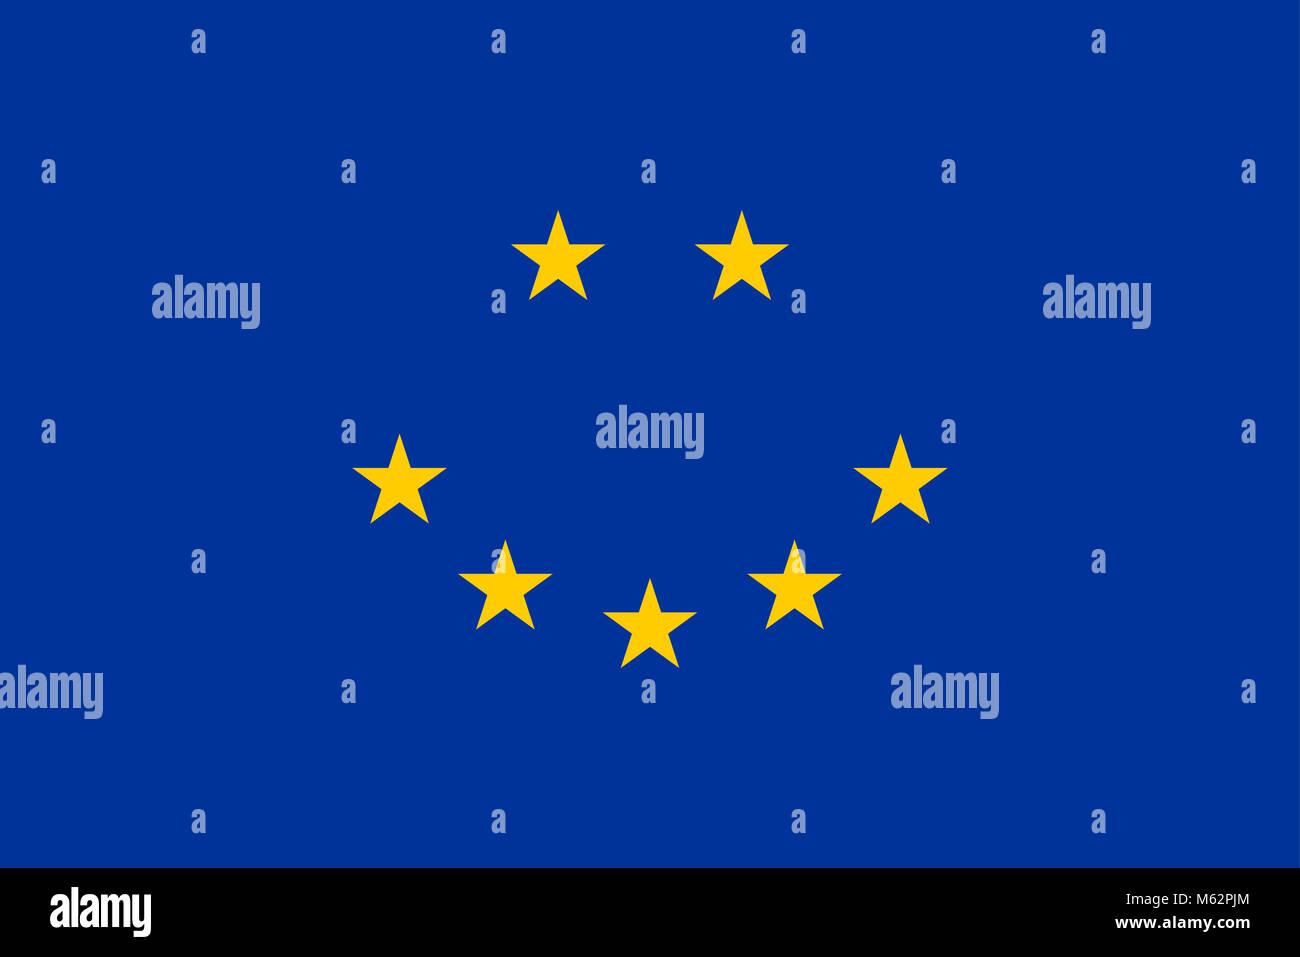 Happy face, made of the European Union flag. Representation of a smiling face, made of seven yellow five-pointed stars of the European flag. Stock Photo